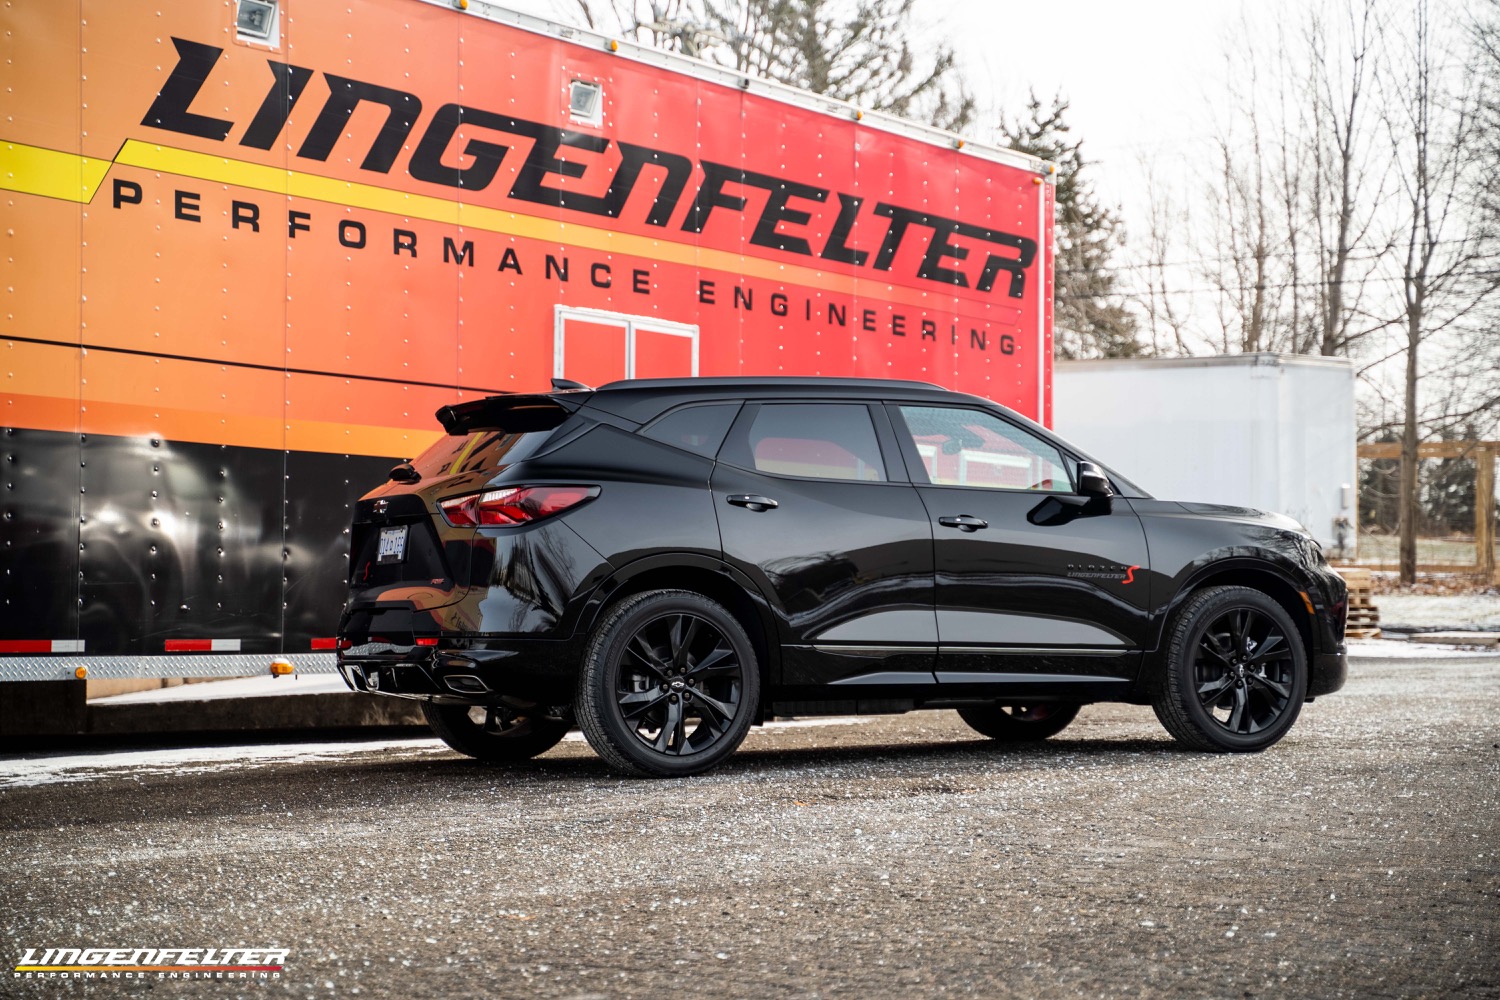 gateway rural Employee Here's Lingenfelter's 450-Horsepower Supercharged Chevy Blazer